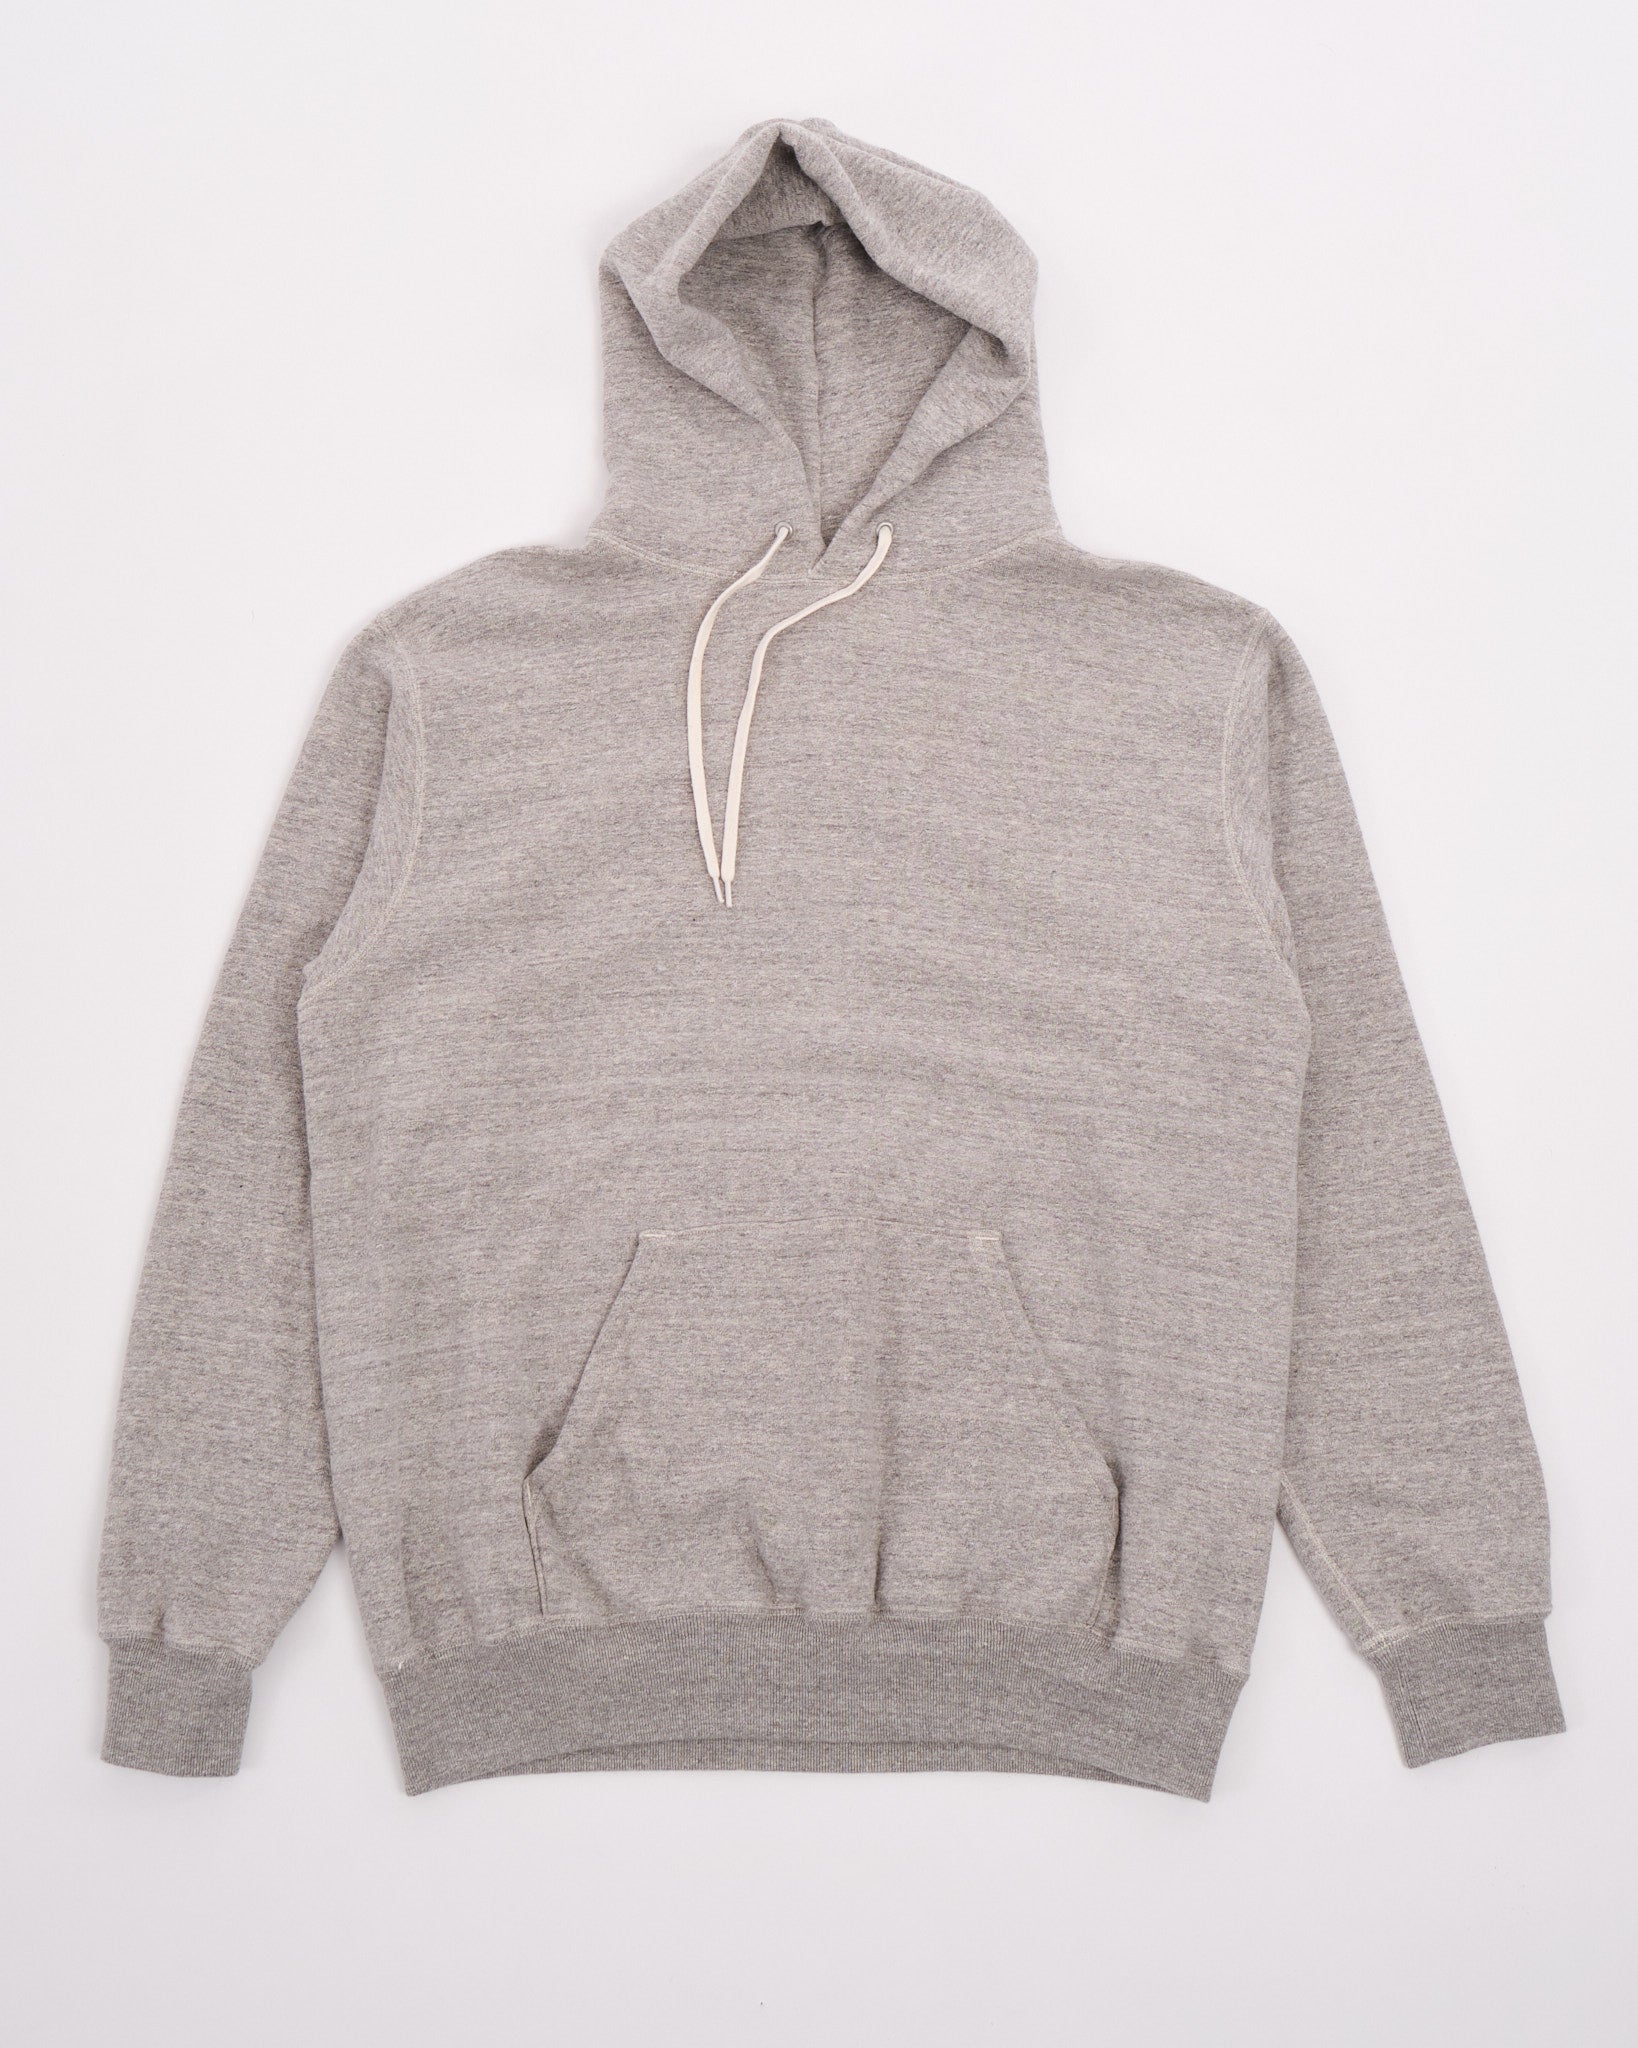 Norse Store  Shipping Worldwide - And Wander Wool Fleece Pullover - Blue  Grey